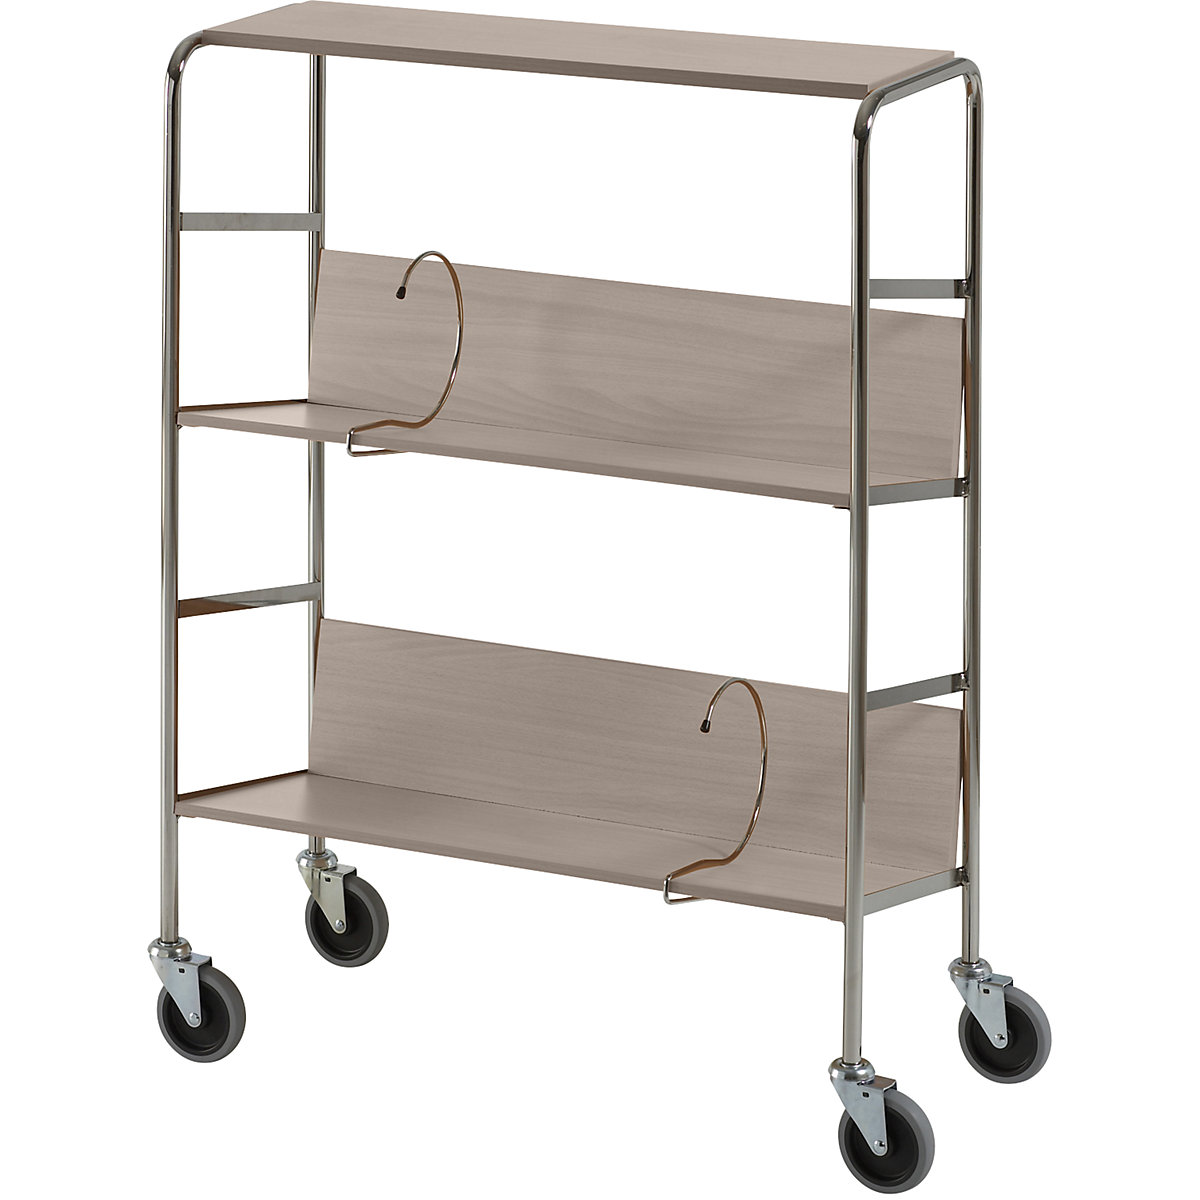 File trolley with top shelf, chrome plated – HelgeNyberg, 3 shelves, LxWxH 800 x 340 x 1060 mm, birch finish, 5+ items-12